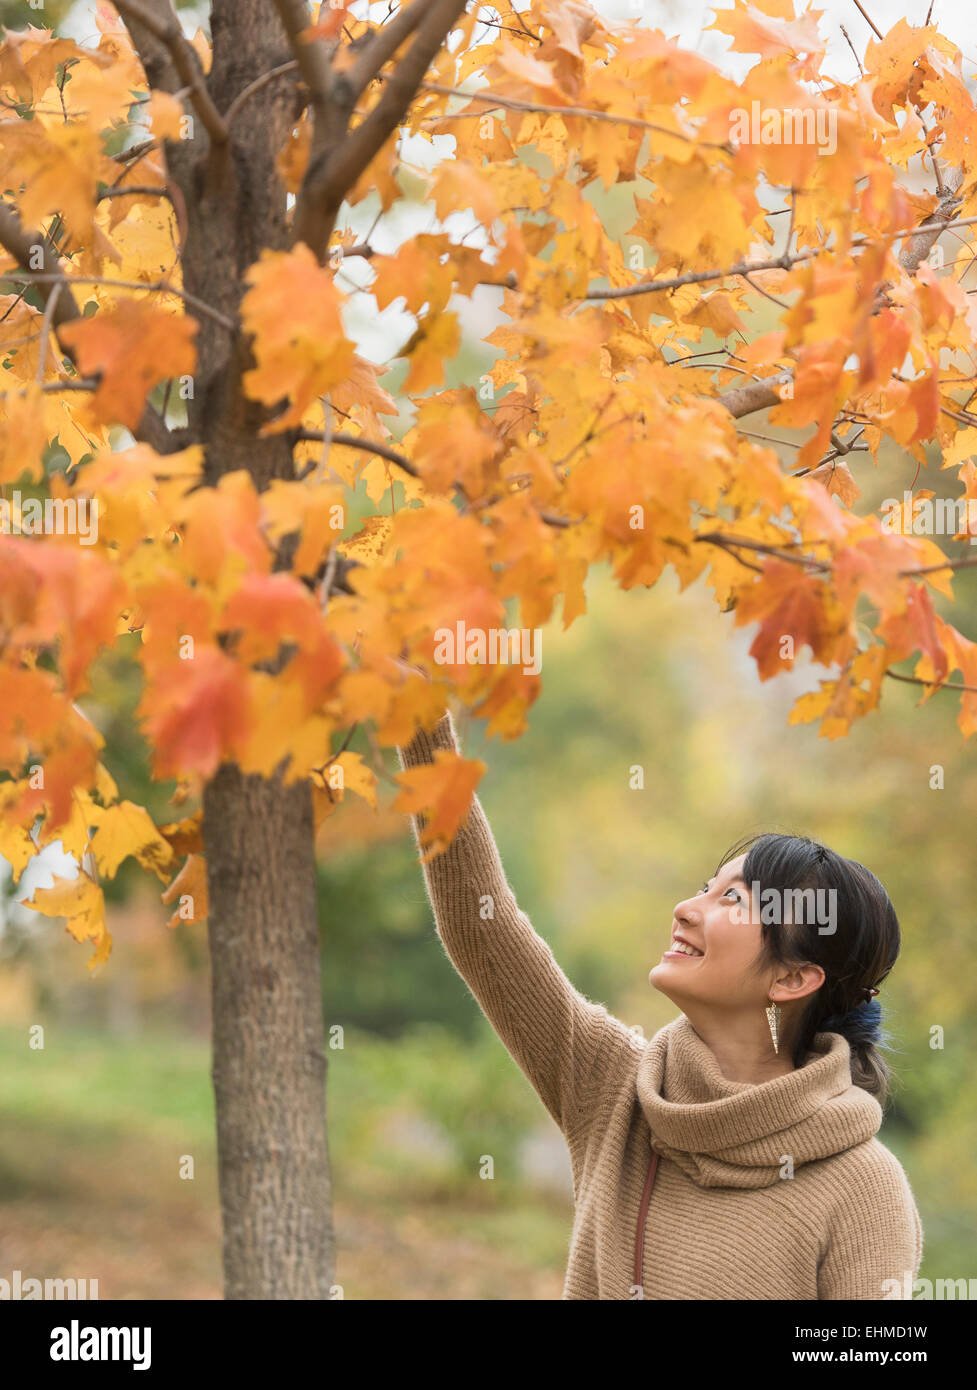 Asian woman reaching for autumn leaves in park Stock Photo